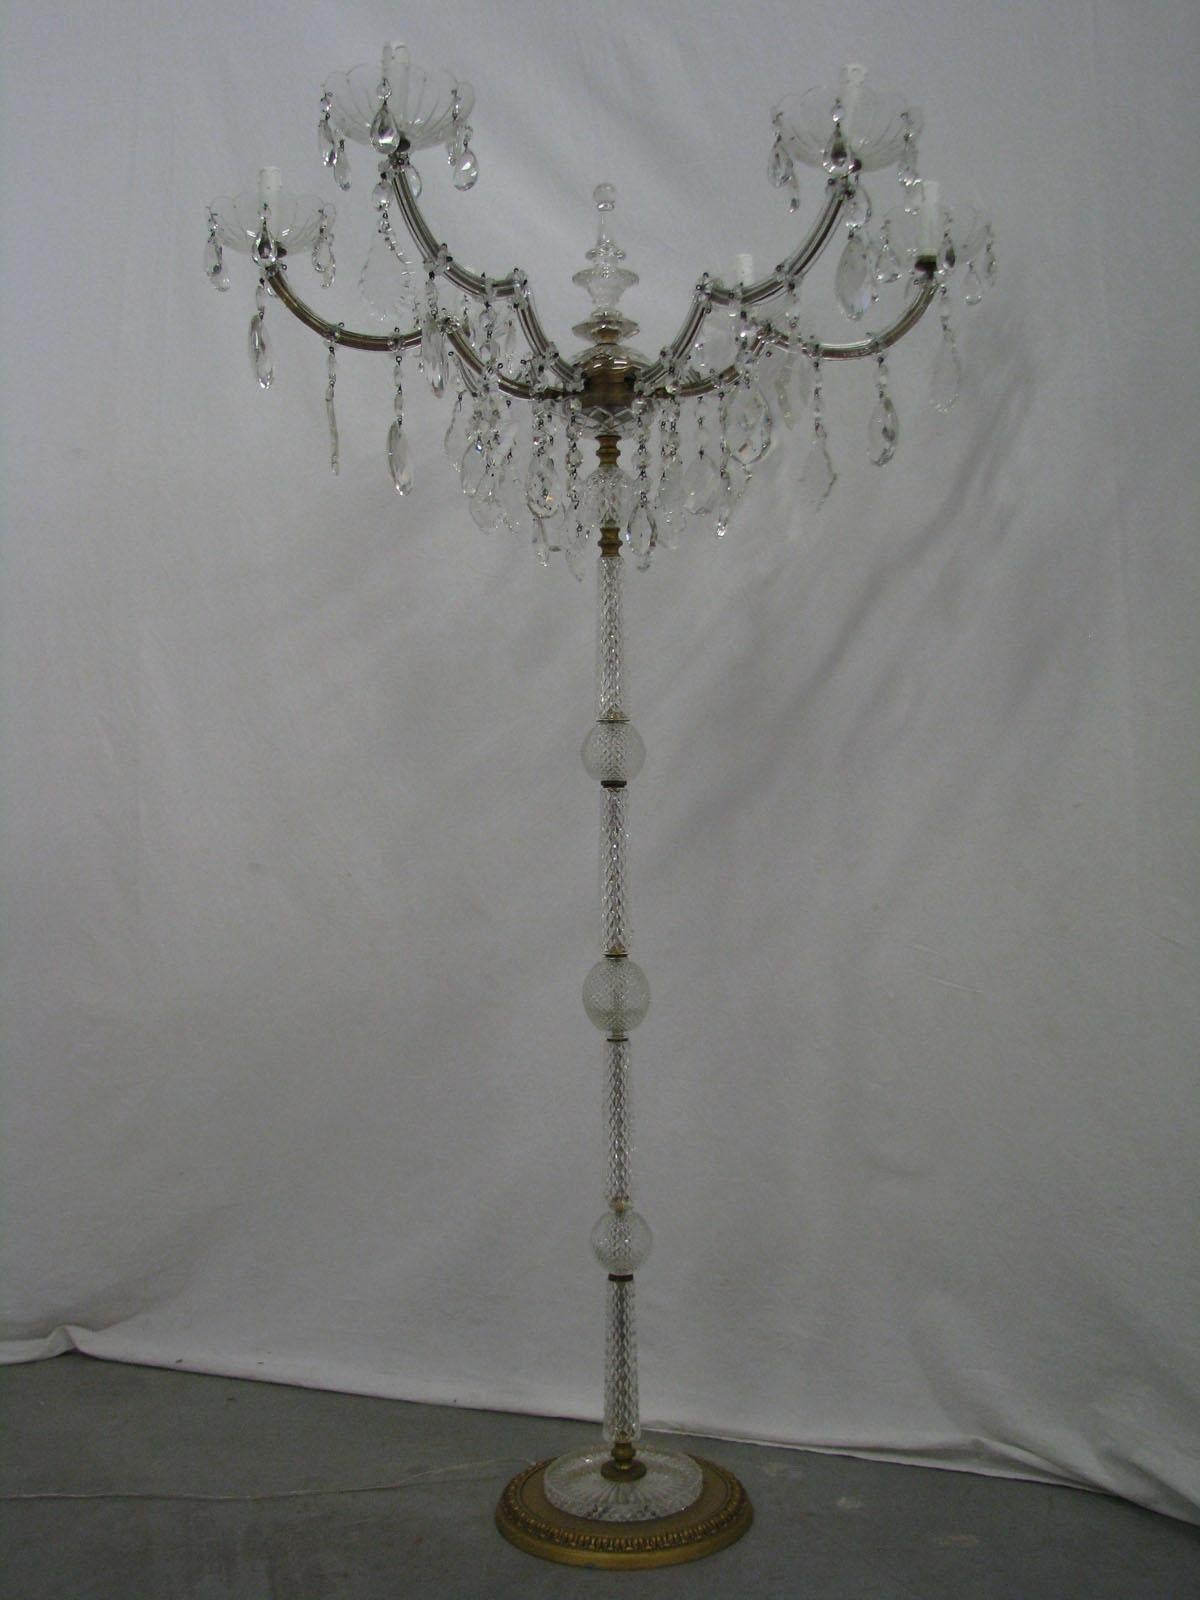 Unusual and extremely decorative object
- 1.5-meter high, floor crystal candelabrum in the style of Marie Therese.
 
While typical Marie Therese chandeliers are quite often offered items,
a giant floor candelabrum made in this style
- is a